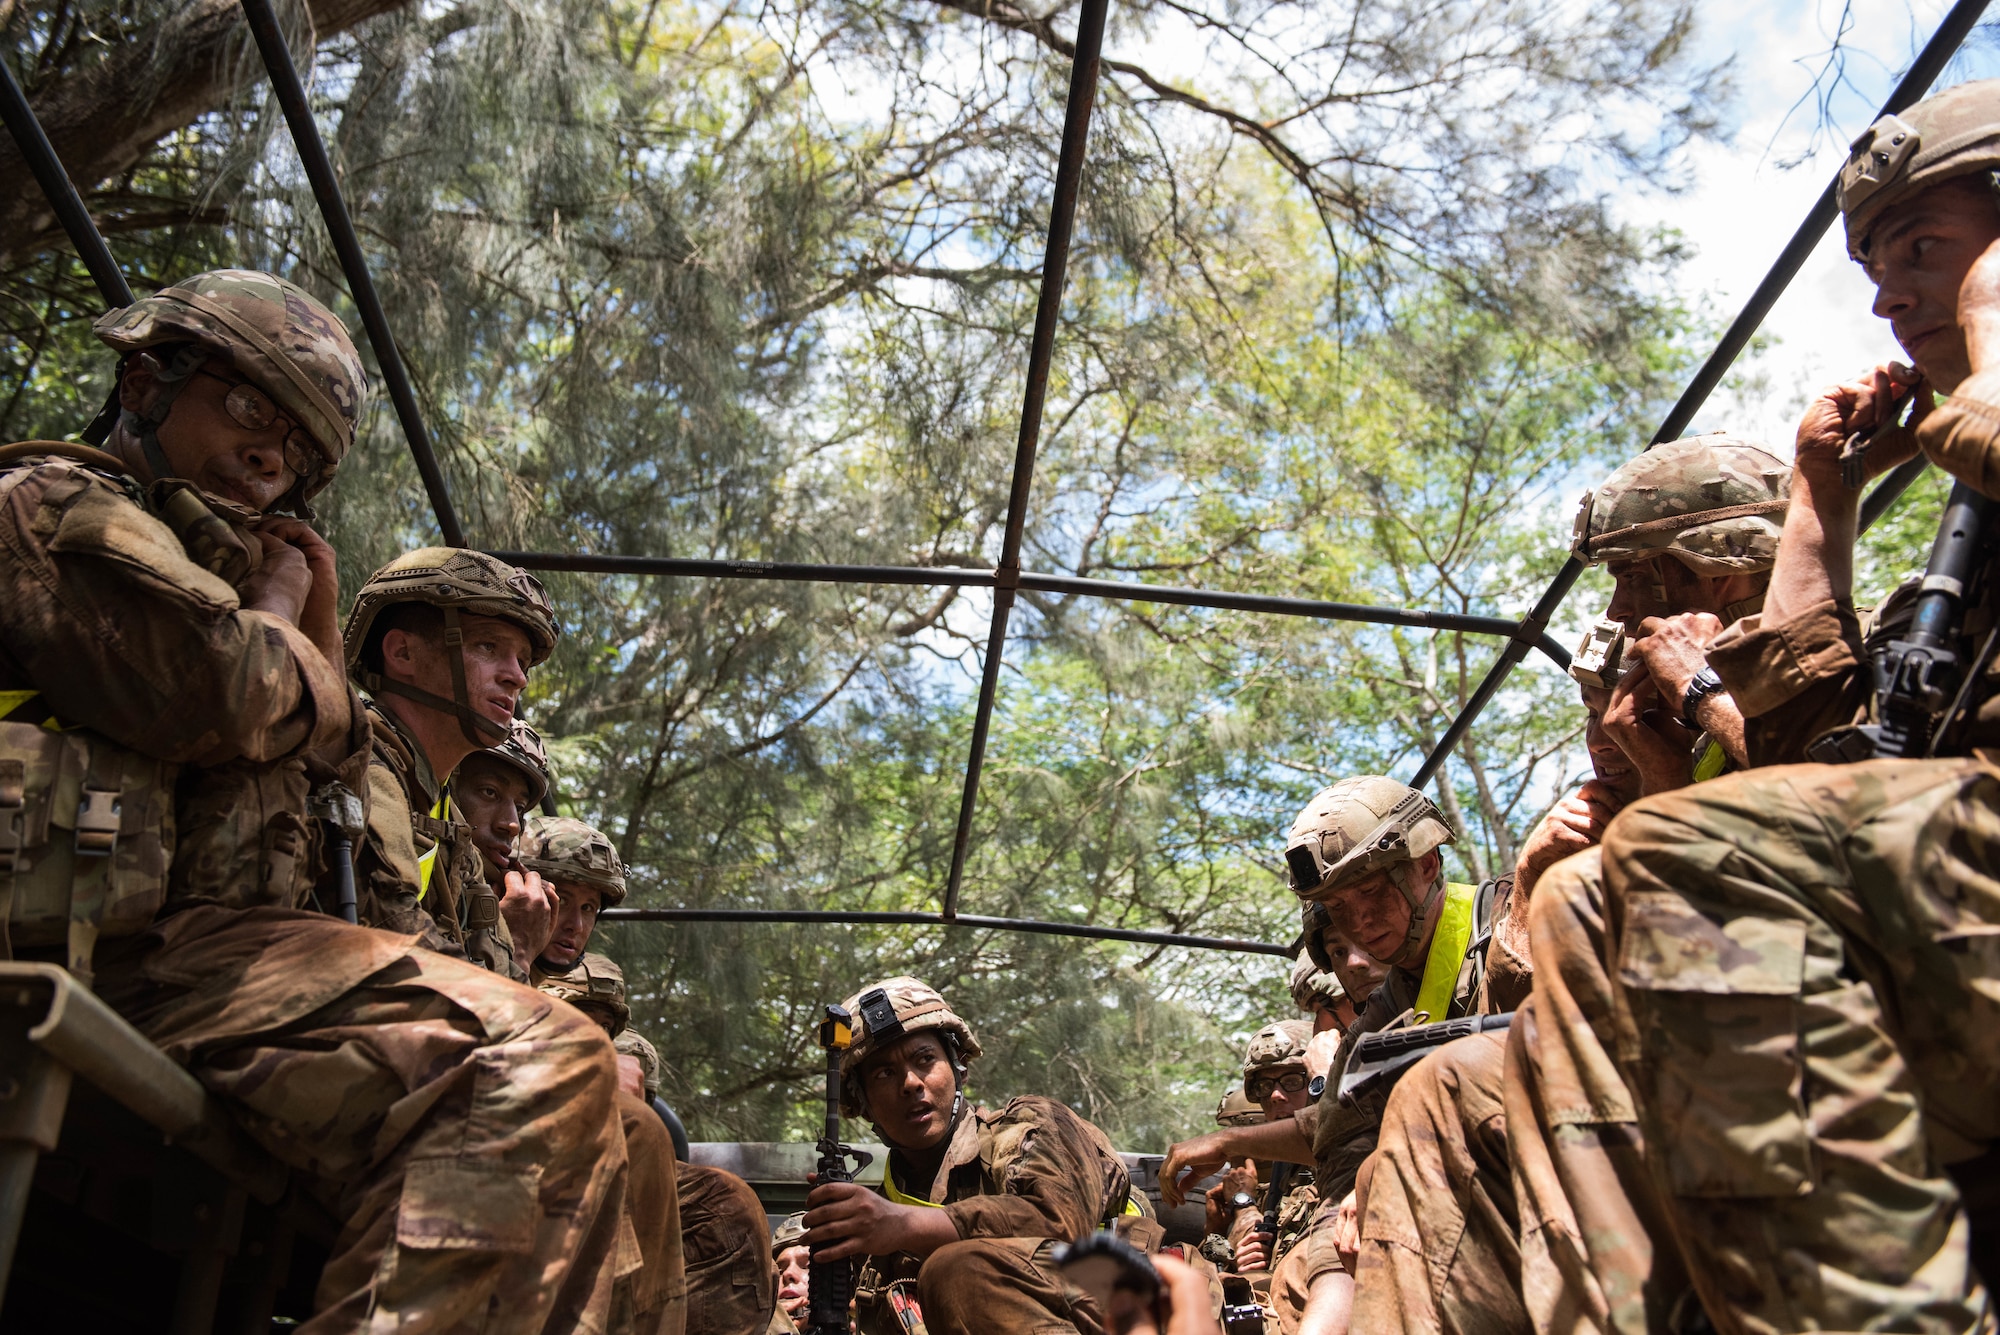 Ranger Assessment Course students prepare to ride back to camp after going through the obstacle course near Schofield Barracks, Oahu, Hawaii, May 20, 2019. Twenty-three Airmen from across the Air Force recently converged on a training camp for a three-week Ranger Assessment Course near Schofield Barracks, May 12-31, 2019. The purpose of the 19-day course is to prepare, assess and evaluate Air Force candidates for Army Ranger School. (U.S. Air Force photo by Staff Sgt. Hailey Haux)